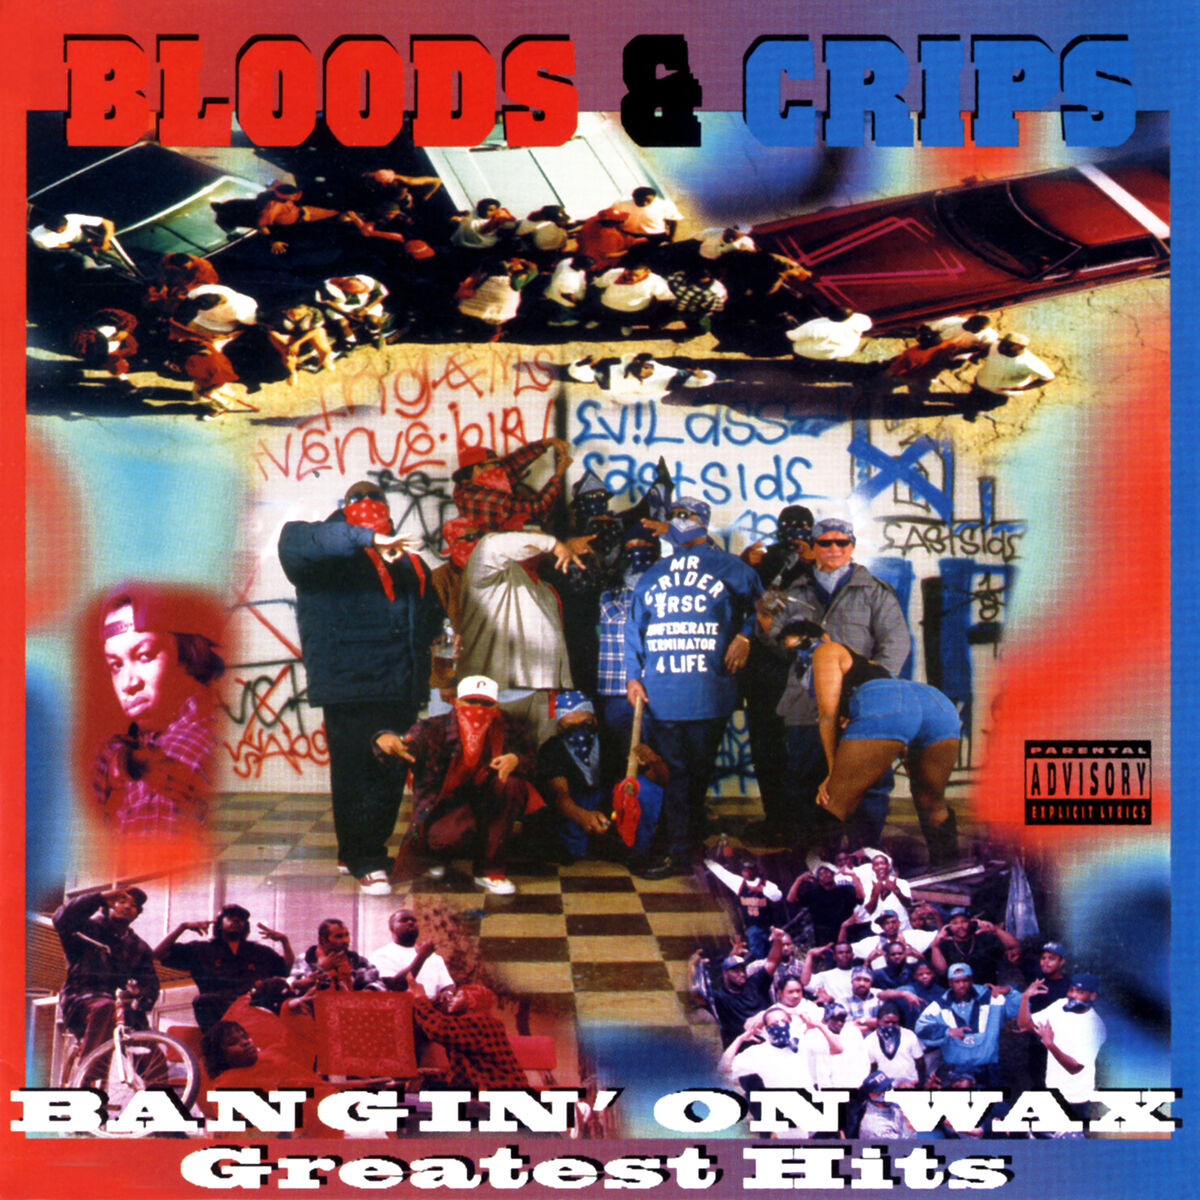 Bloods & Crips - Bangin' on Wax Greatest Hits: lyrics and songs 